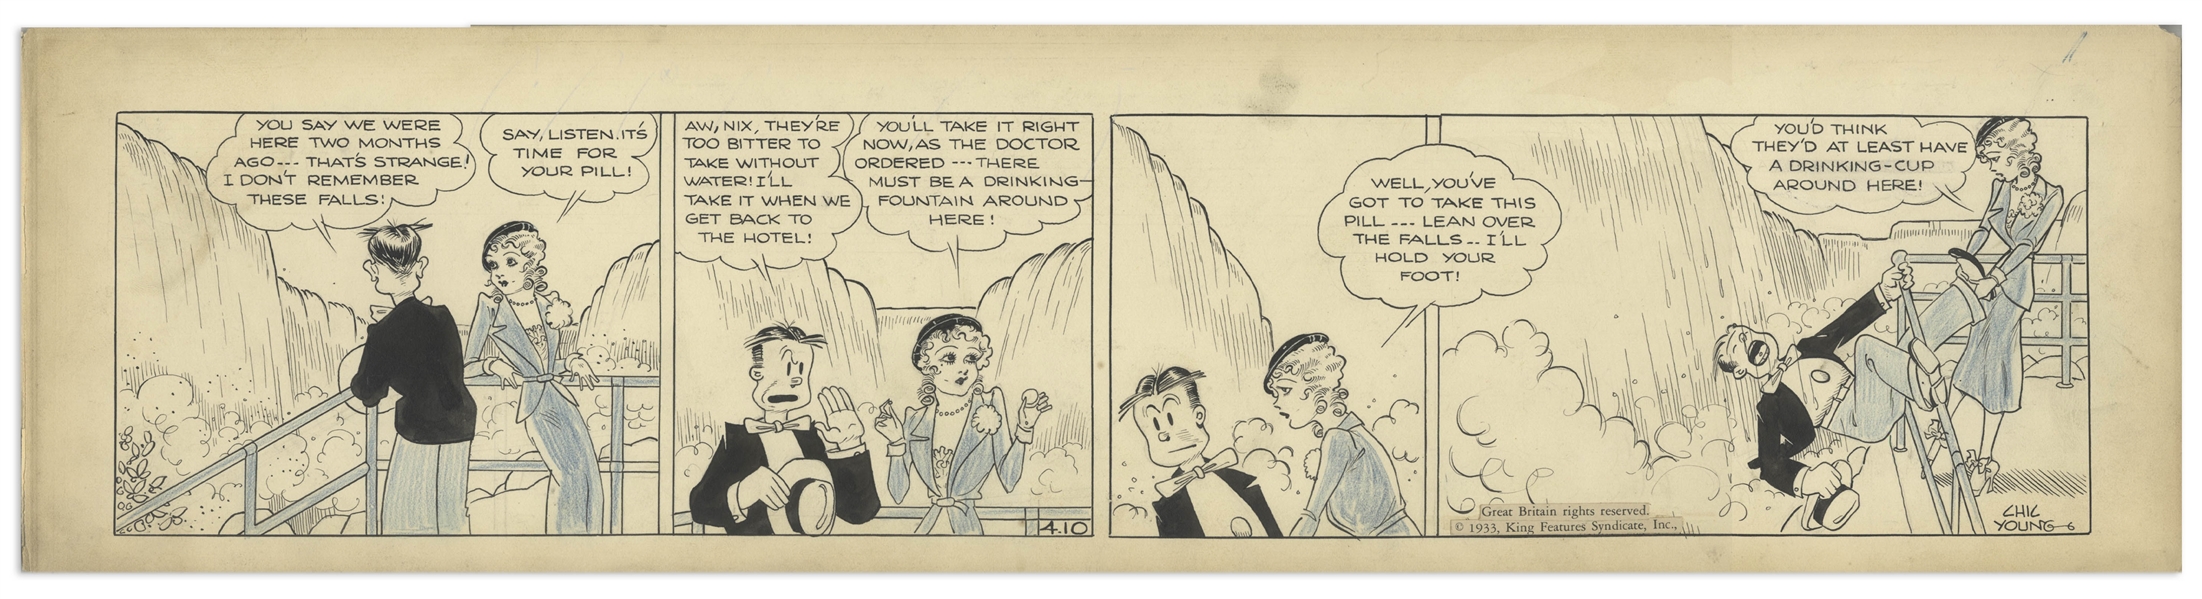 Chic Young Hand-Drawn ''Blondie'' Comic Strip From 1933 Titled ''As Dry as the Sahara'' -- Dagwood's Amnesia Is in Full Force as He and Blondie Visit Niagara Falls